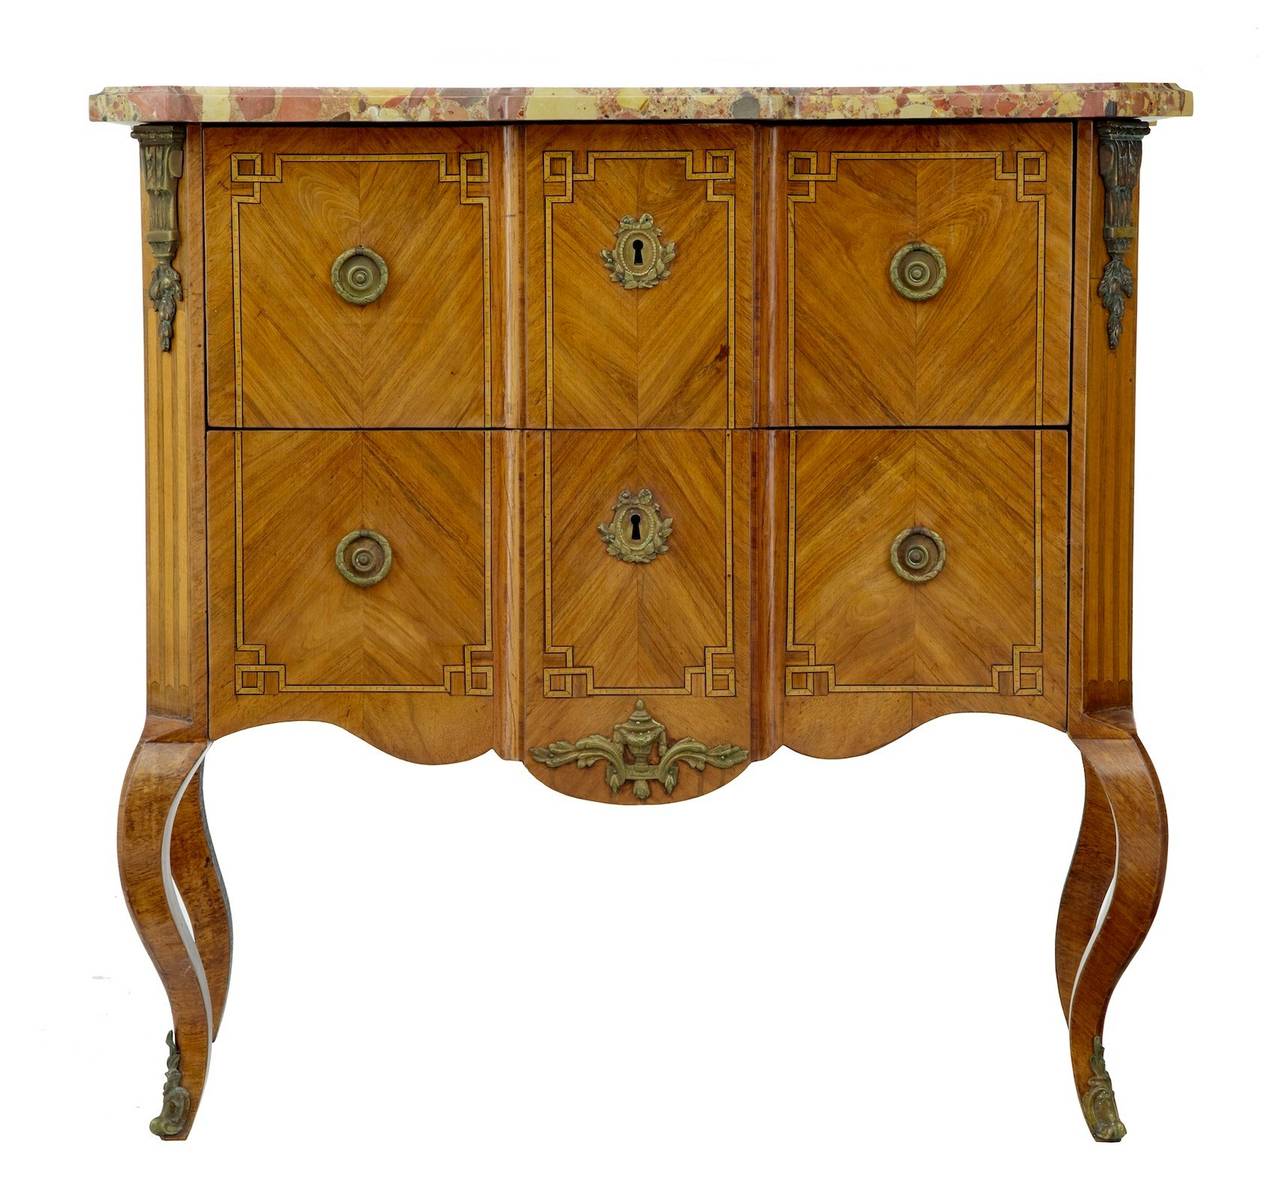 Good quality French commode, circa 1860.
Two-drawer shaped front kingwood chest, with satinwood inlay and ebony stringing.
Original ormolu handles and mounts.
Stunning marble-top with one loss to back edge (see picture)
Standing on cabriole